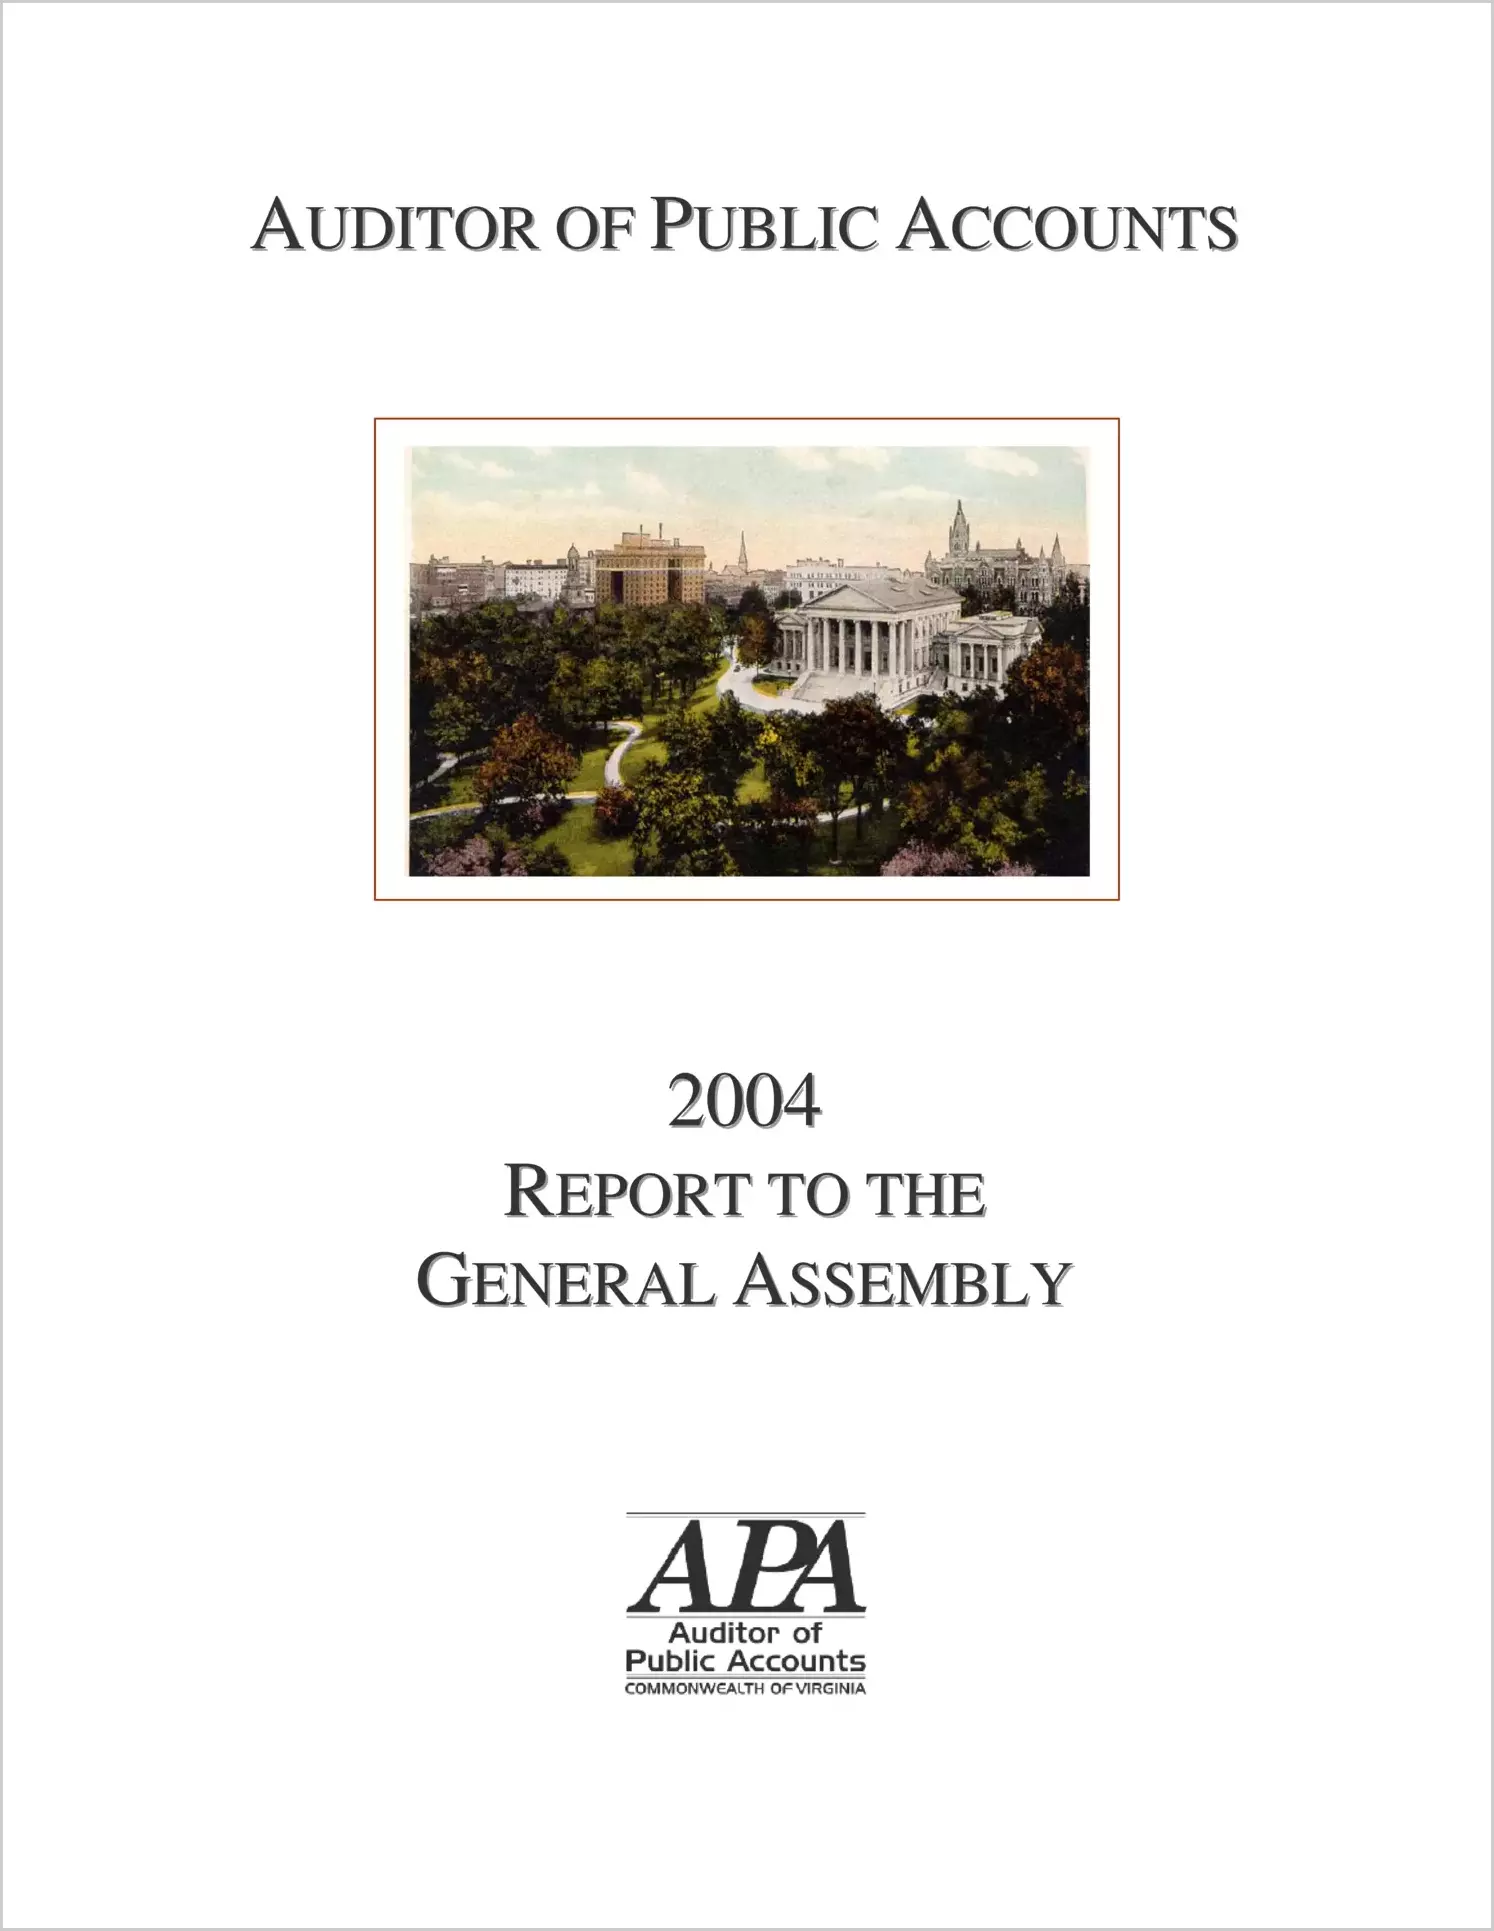 Special ReportAuditor of Public Accounts Annual Report to the General Assembly for 2004 (Report Date: October 2004)